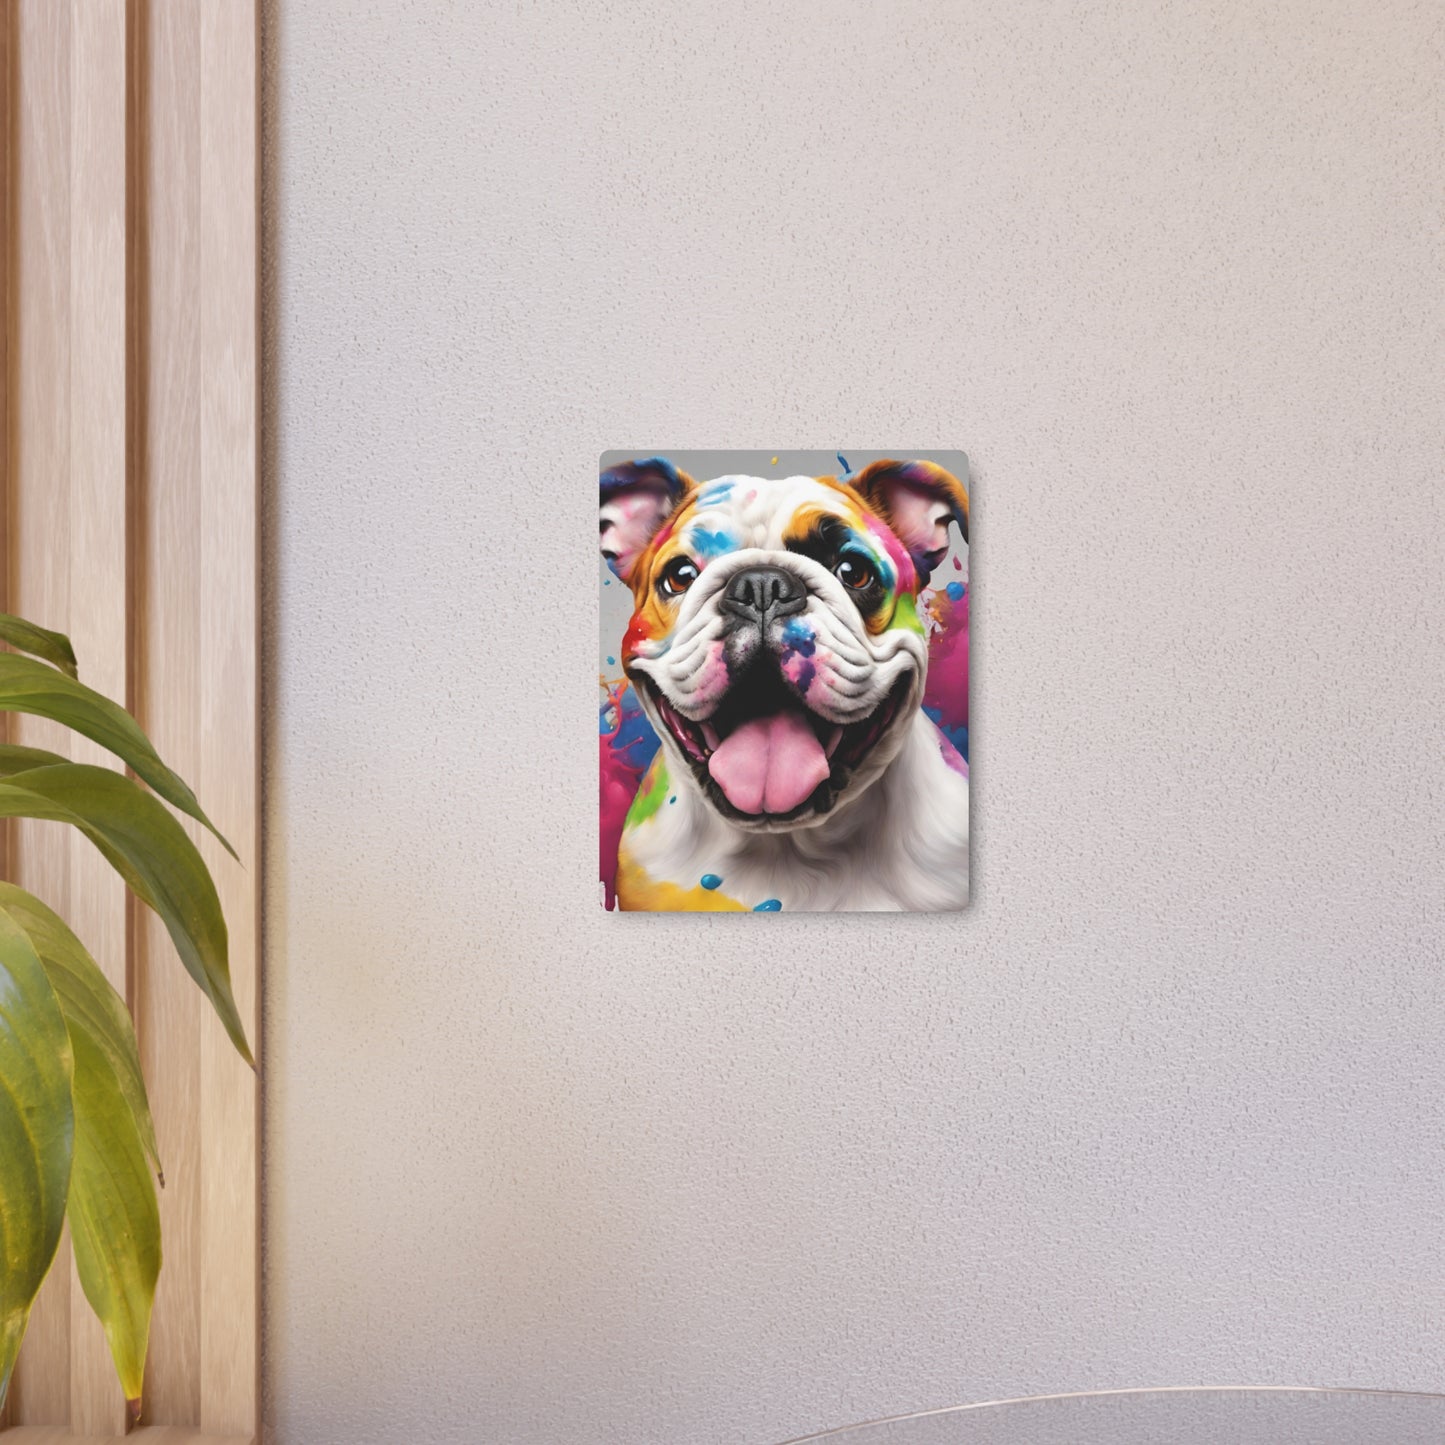 Metal Wall Art Decor featuring a Colorful Bulldog . Mounting tools included. Versatile Home Decor.